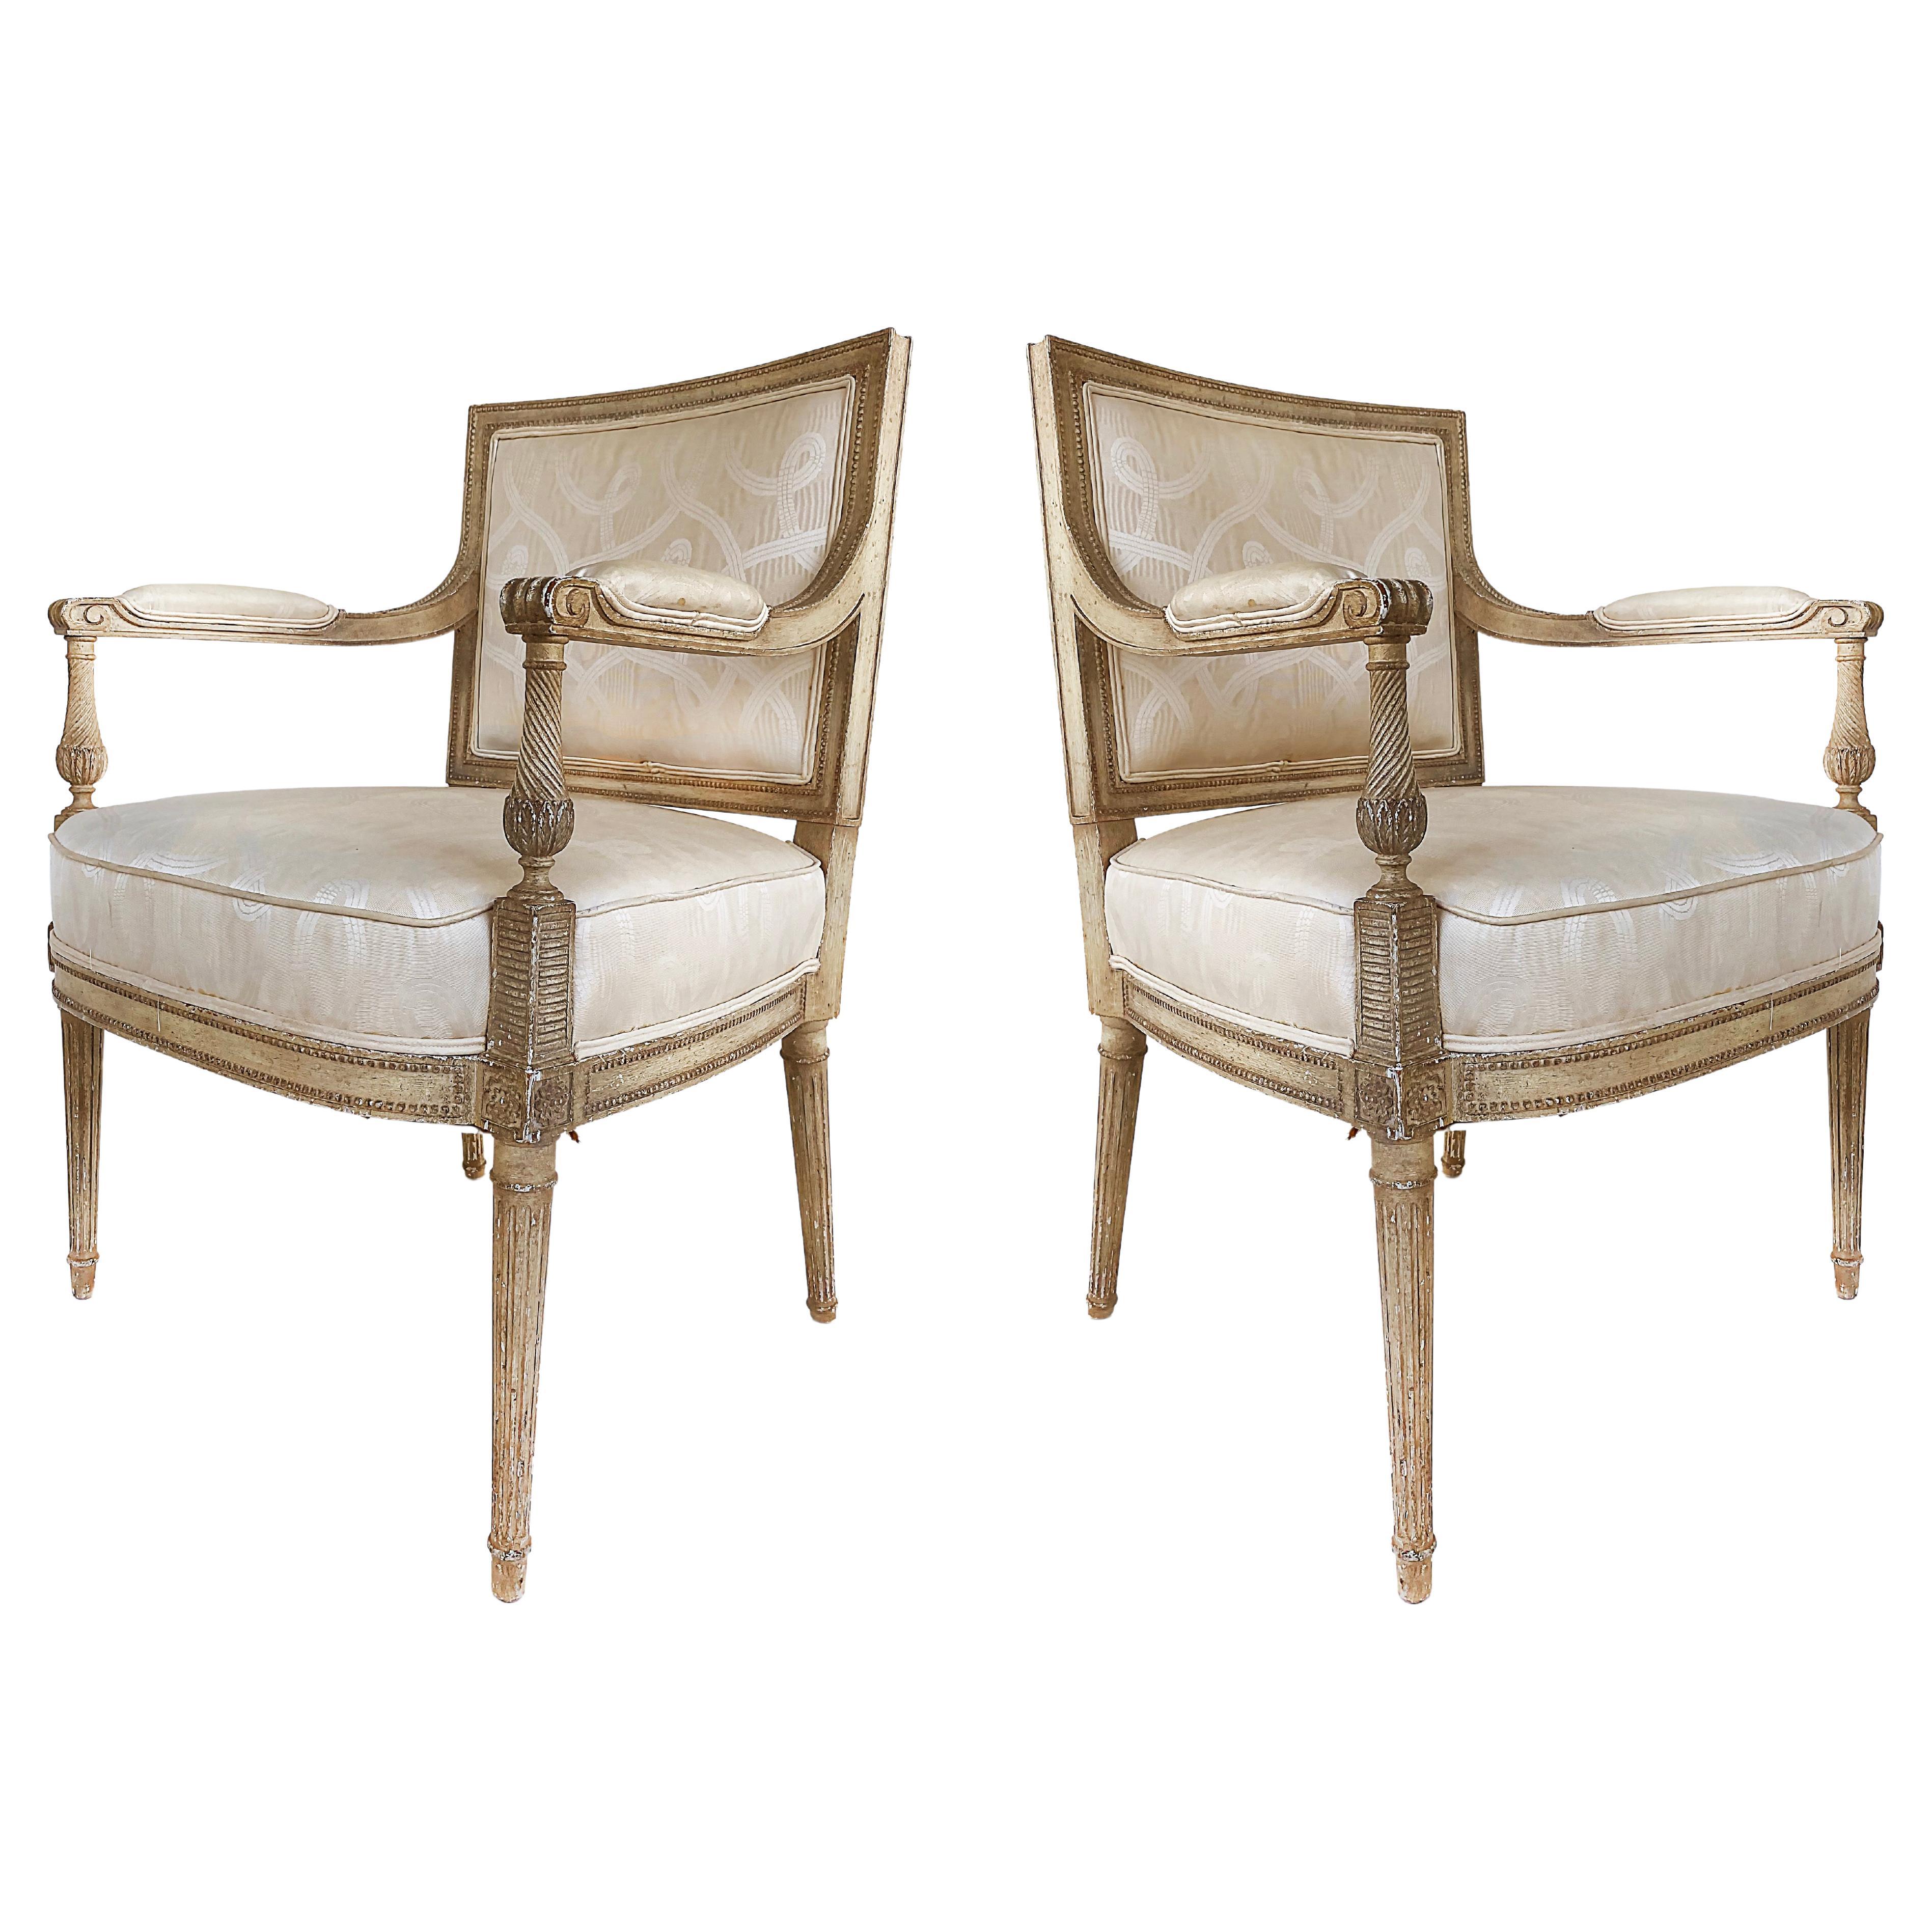 French Louis XVI Style Painted Fauteuil Armchairs, Late 19th Century -Early 20th